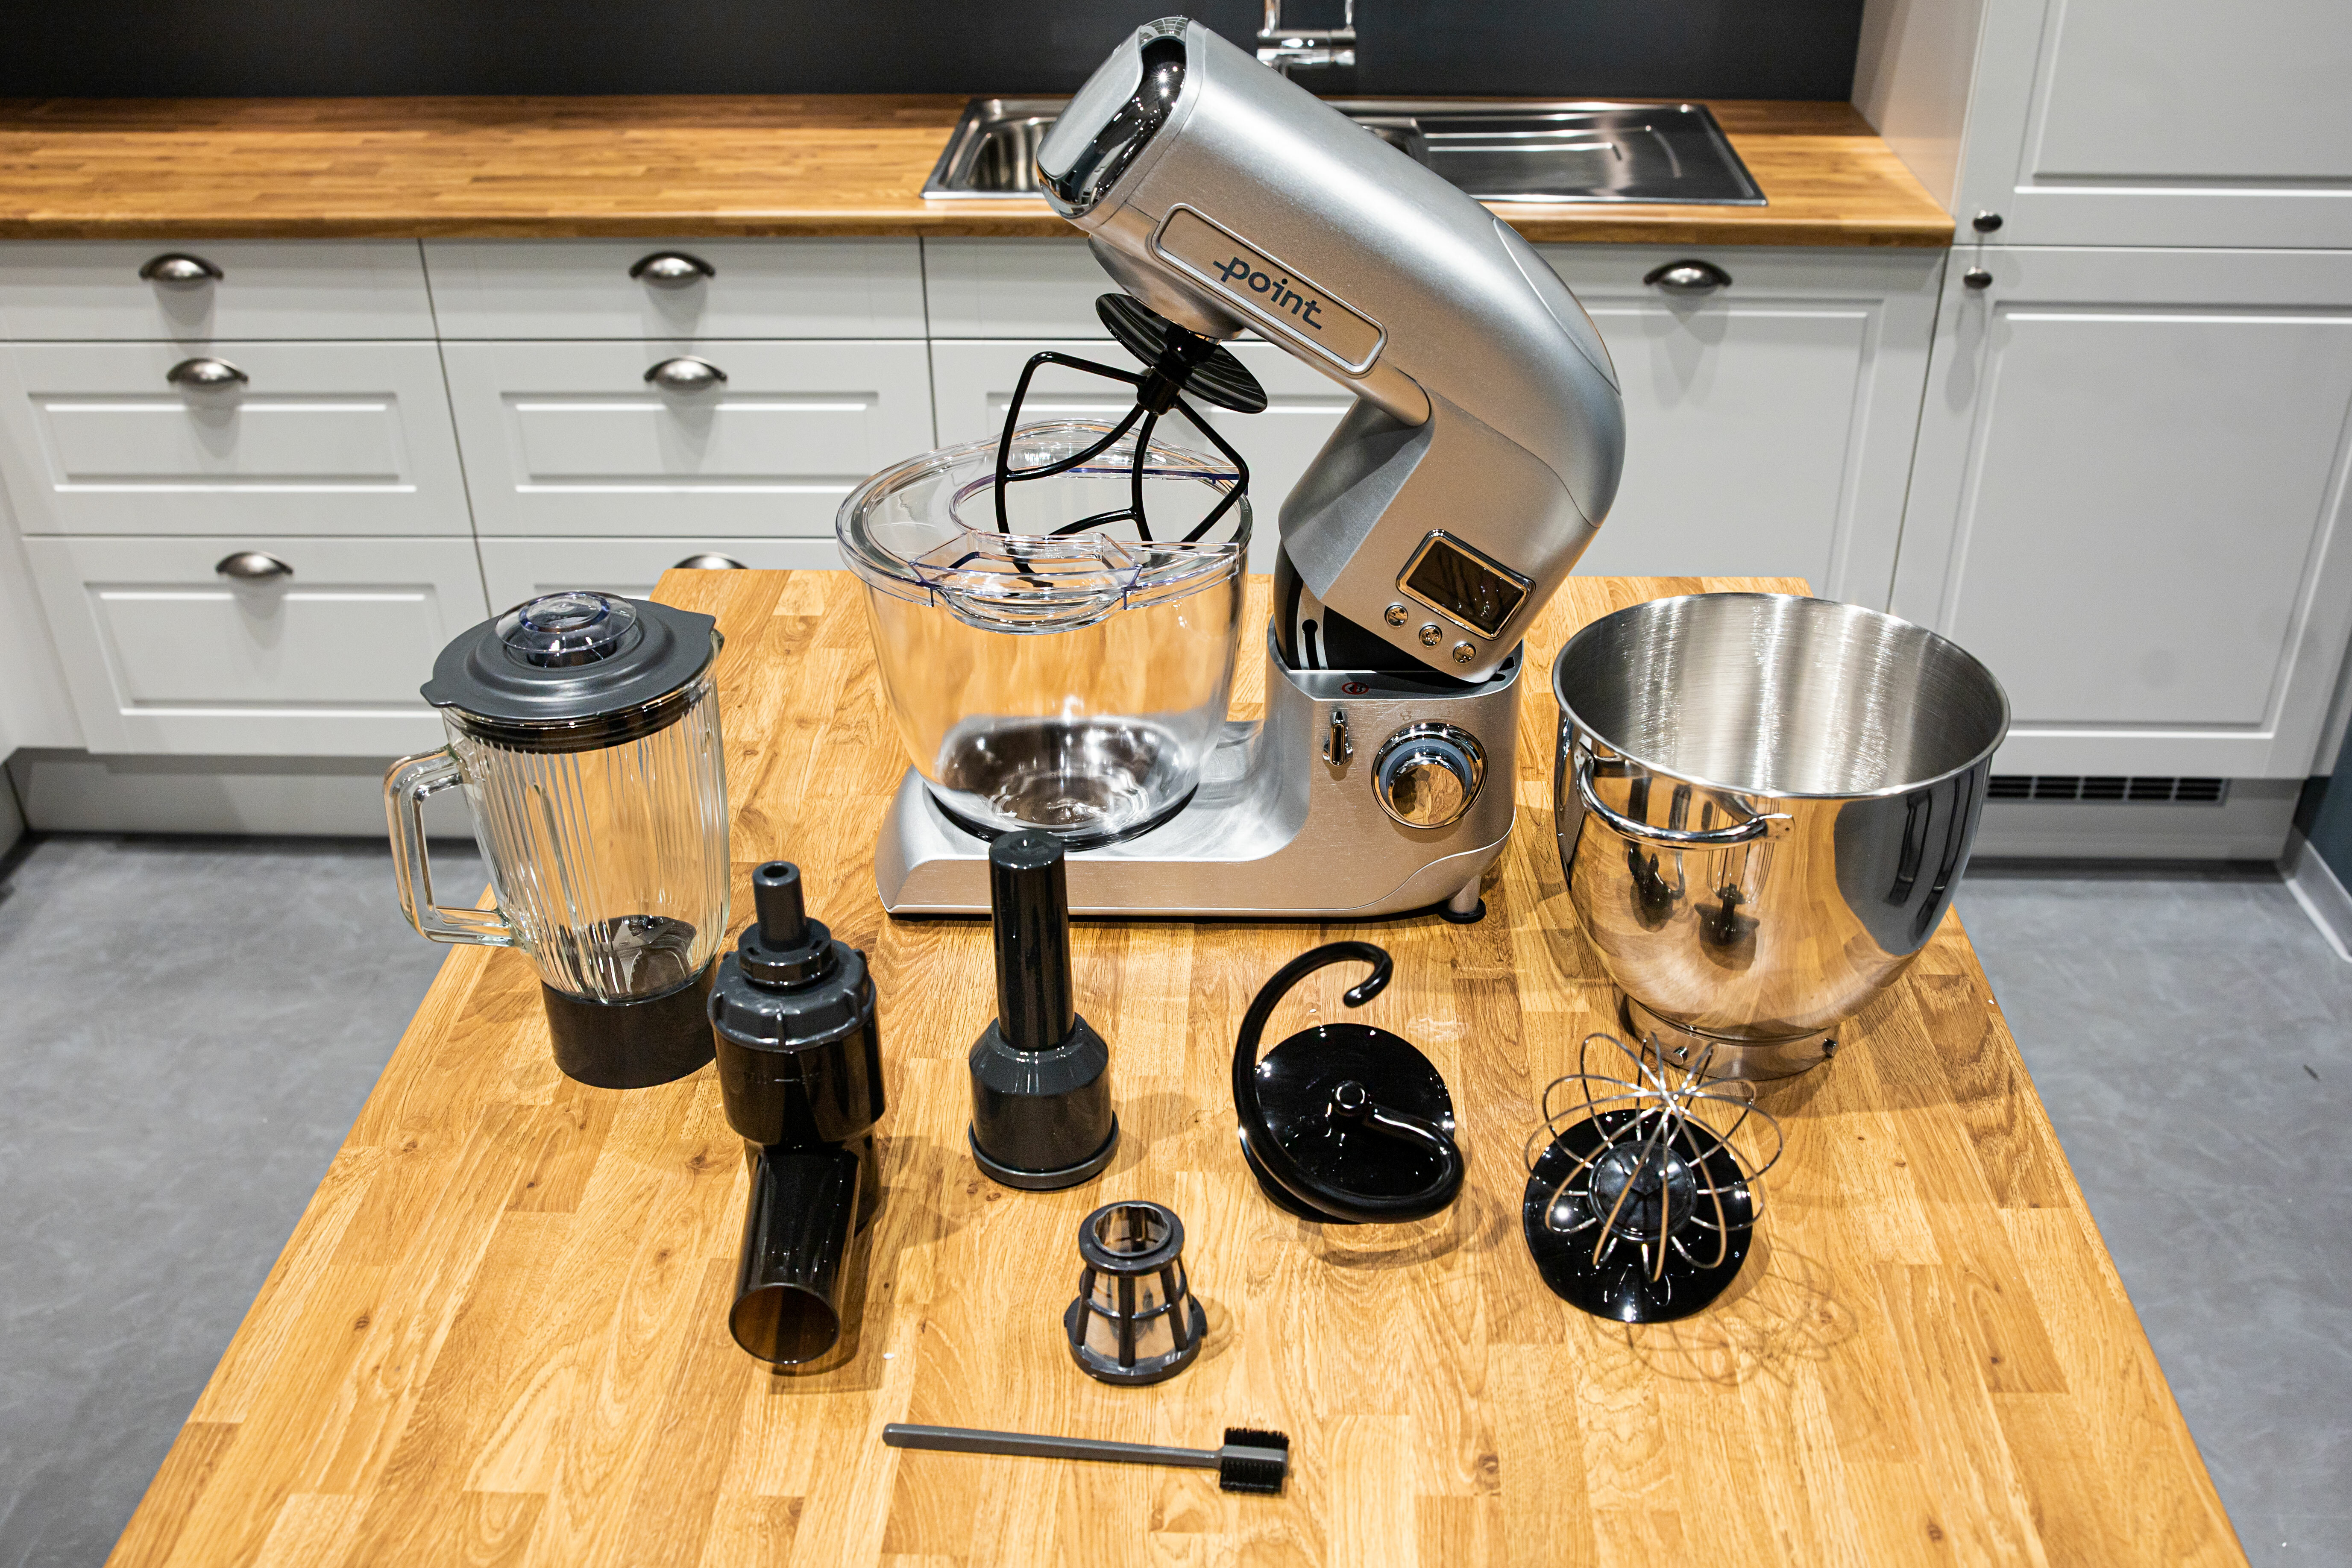 Point Pro POKM55MP1500 kitchen machine and attachment on the counter